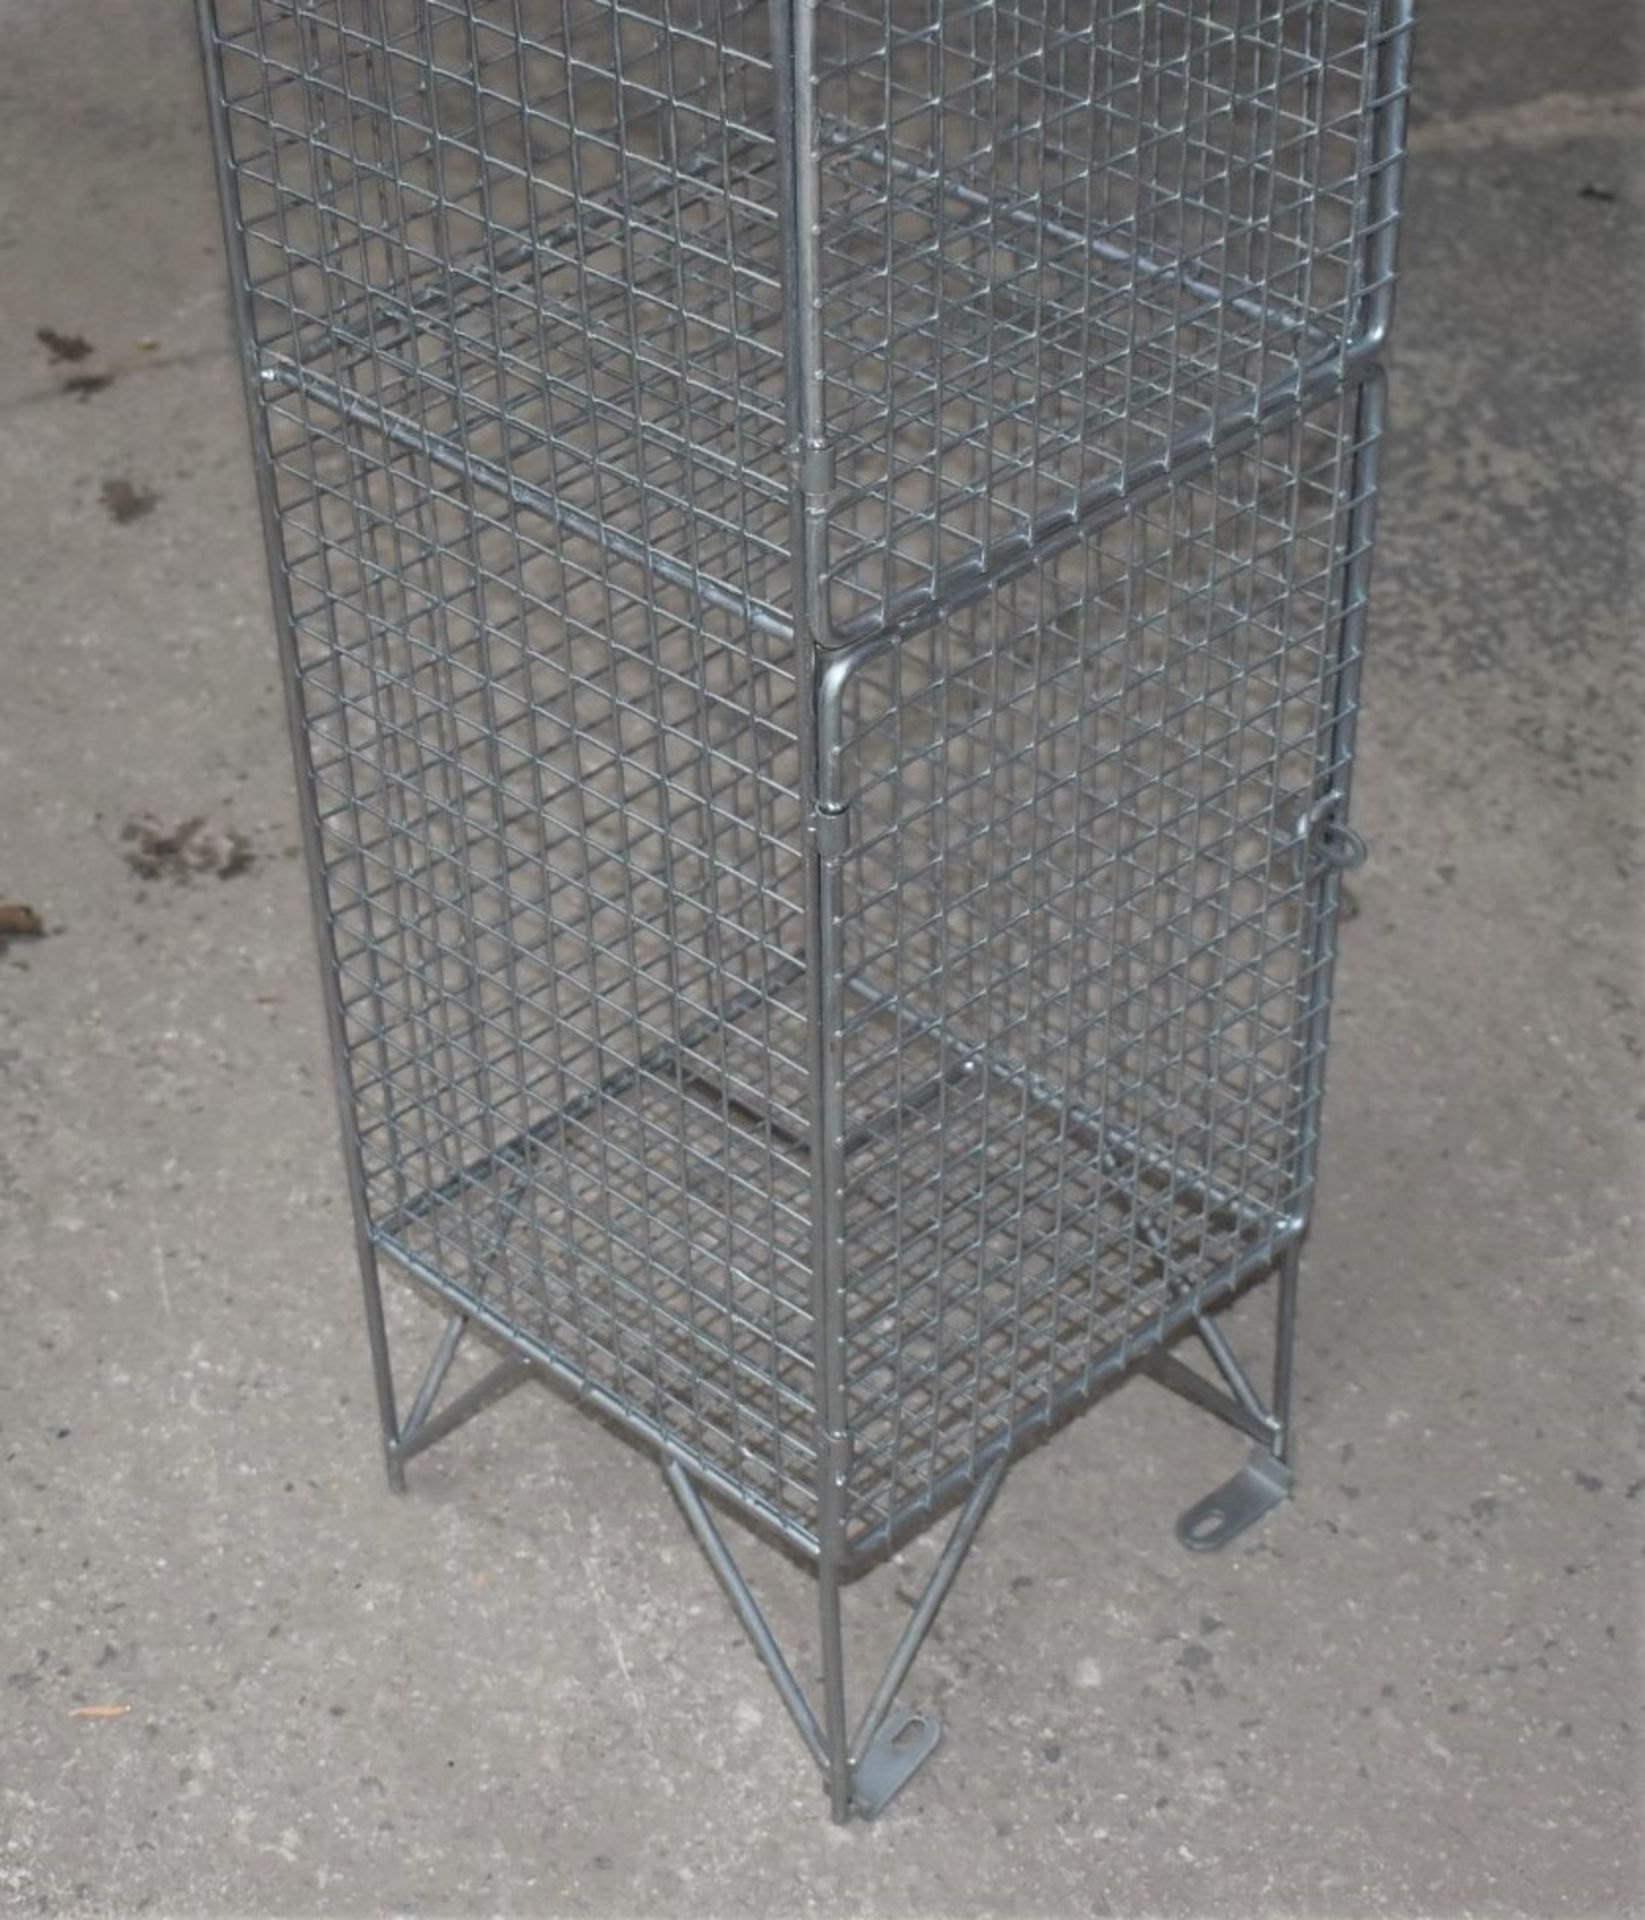 1 x Wire Mesh Cage Lockers With Four Locker Compartments - Dimensions: H193 x W30 x D32 cms - Ref: - Image 3 of 11